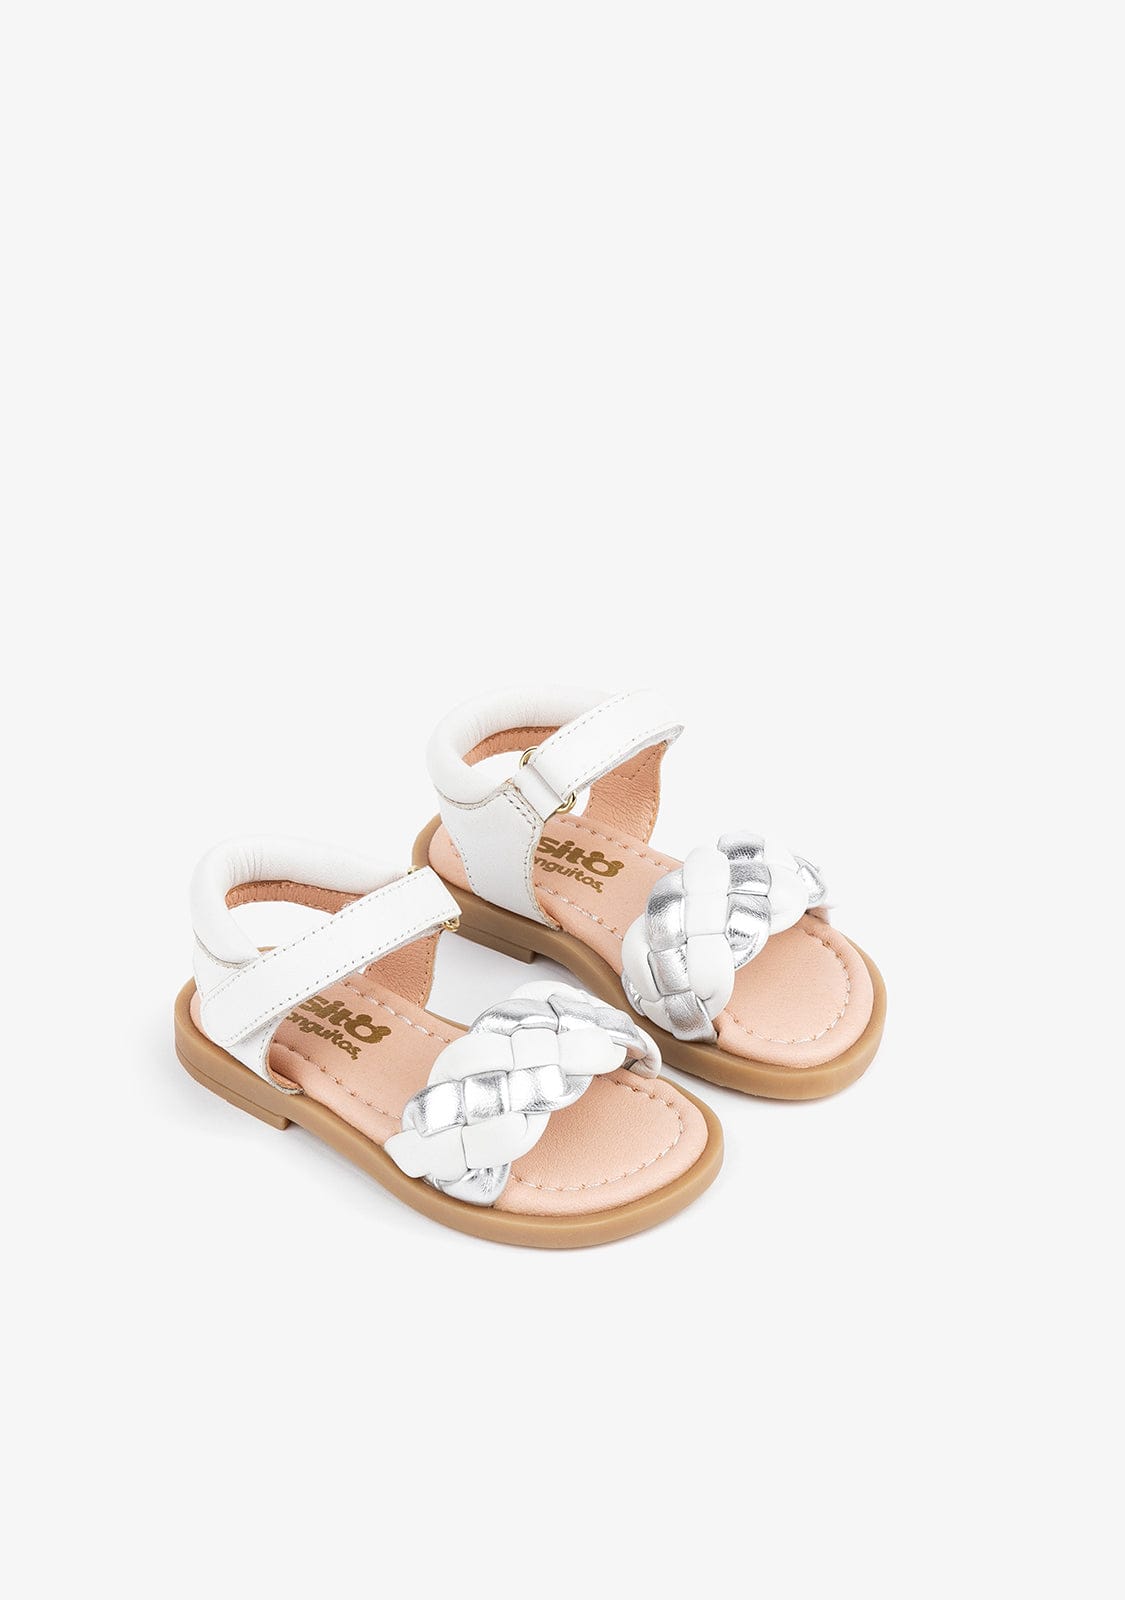 OSITO Shoes Baby's White/Silver Braided Leather Sandals